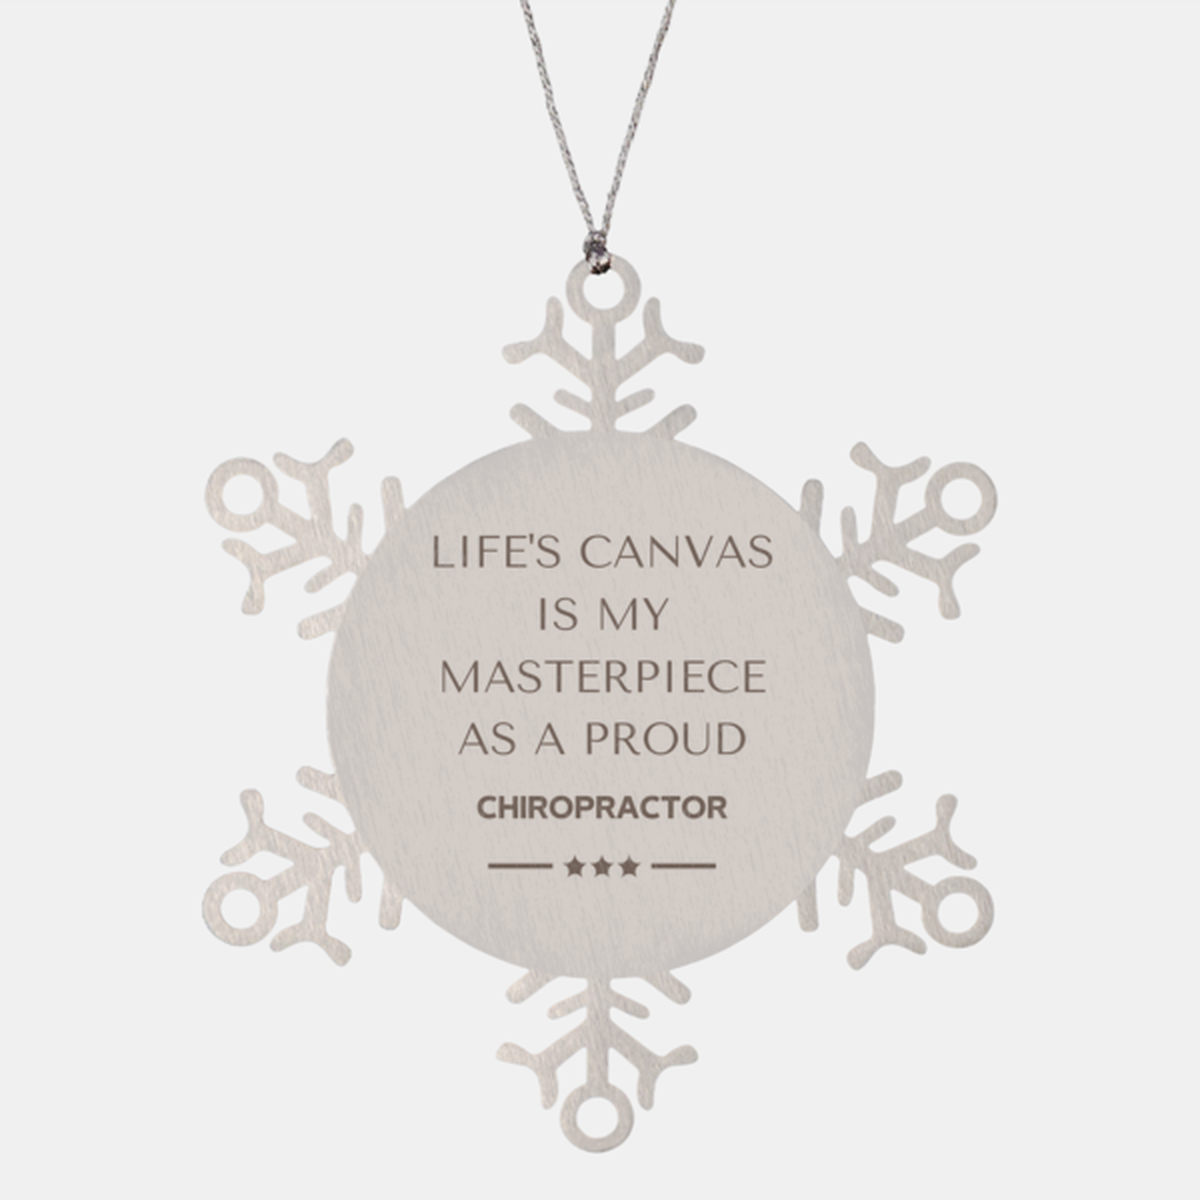 Proud Chiropractor Gifts, Life's canvas is my masterpiece, Epic Birthday Christmas Unique Snowflake Ornament For Chiropractor, Coworkers, Men, Women, Friends